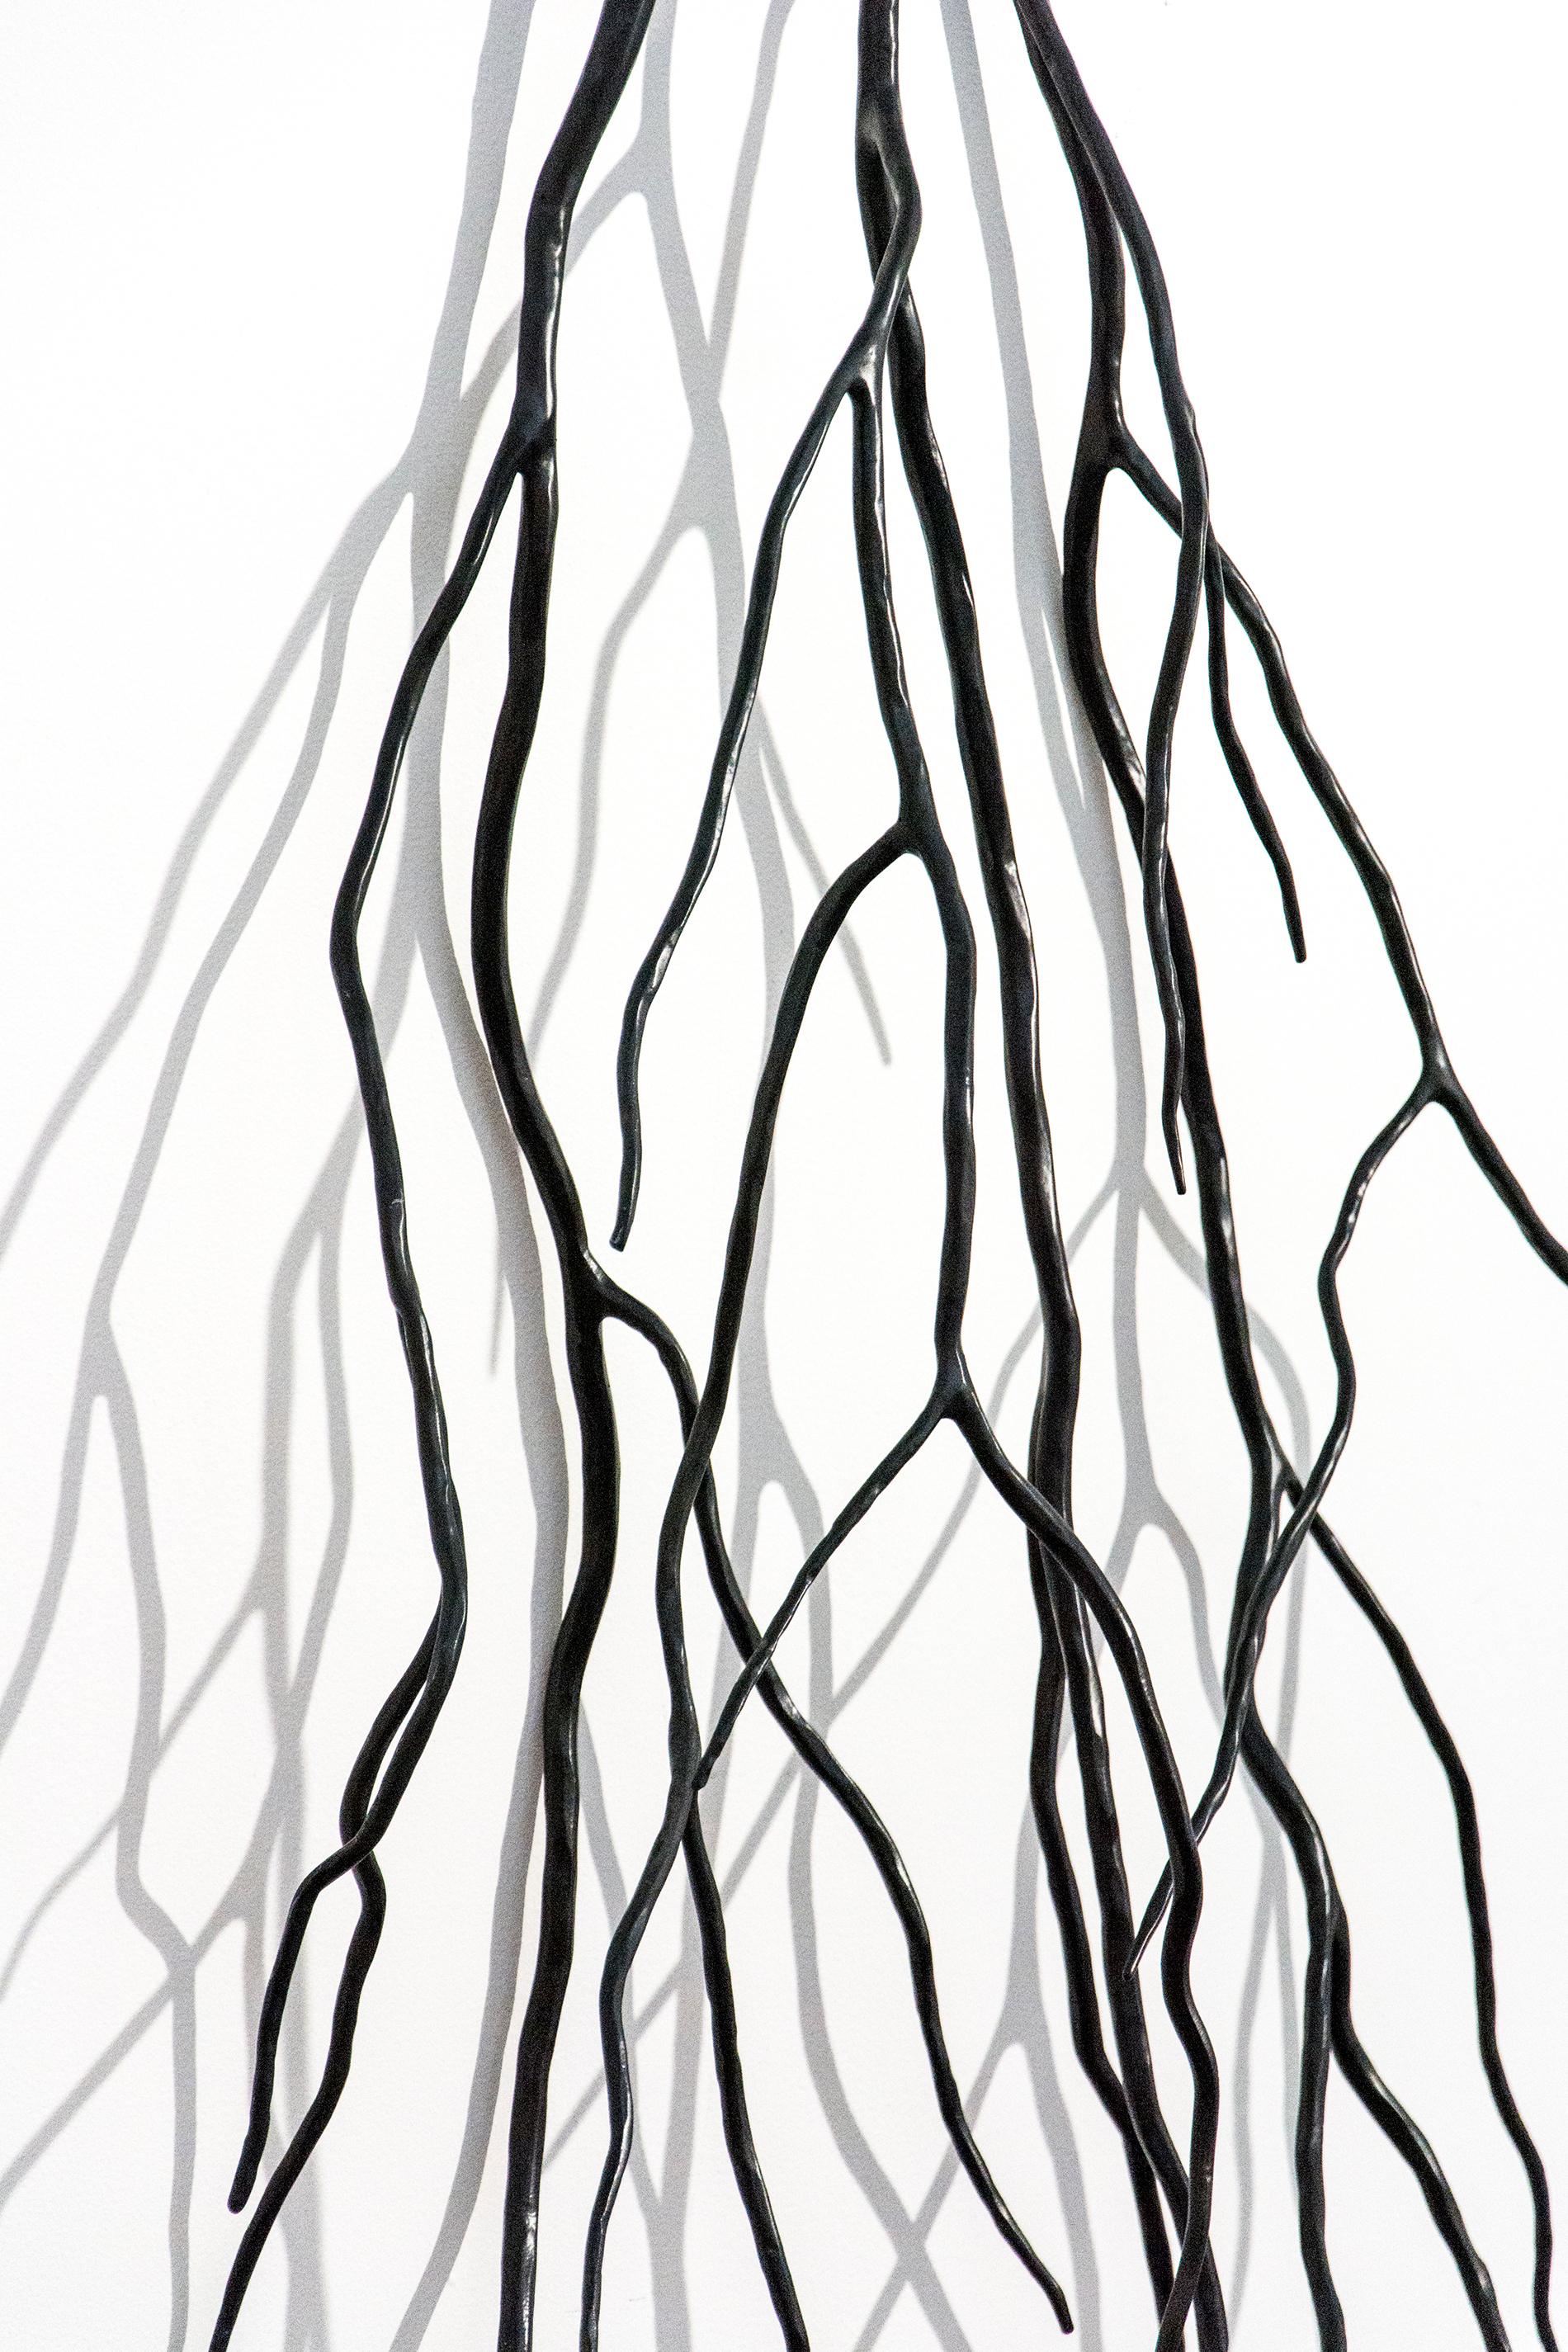 This striking, powder coated steel bough by Shayne Dark resembles a network of dangling roots or veins. Poised between representation and abstraction, this intricate hand forged wall sculpture is saturated in egg shell black. 

Evocative of natural